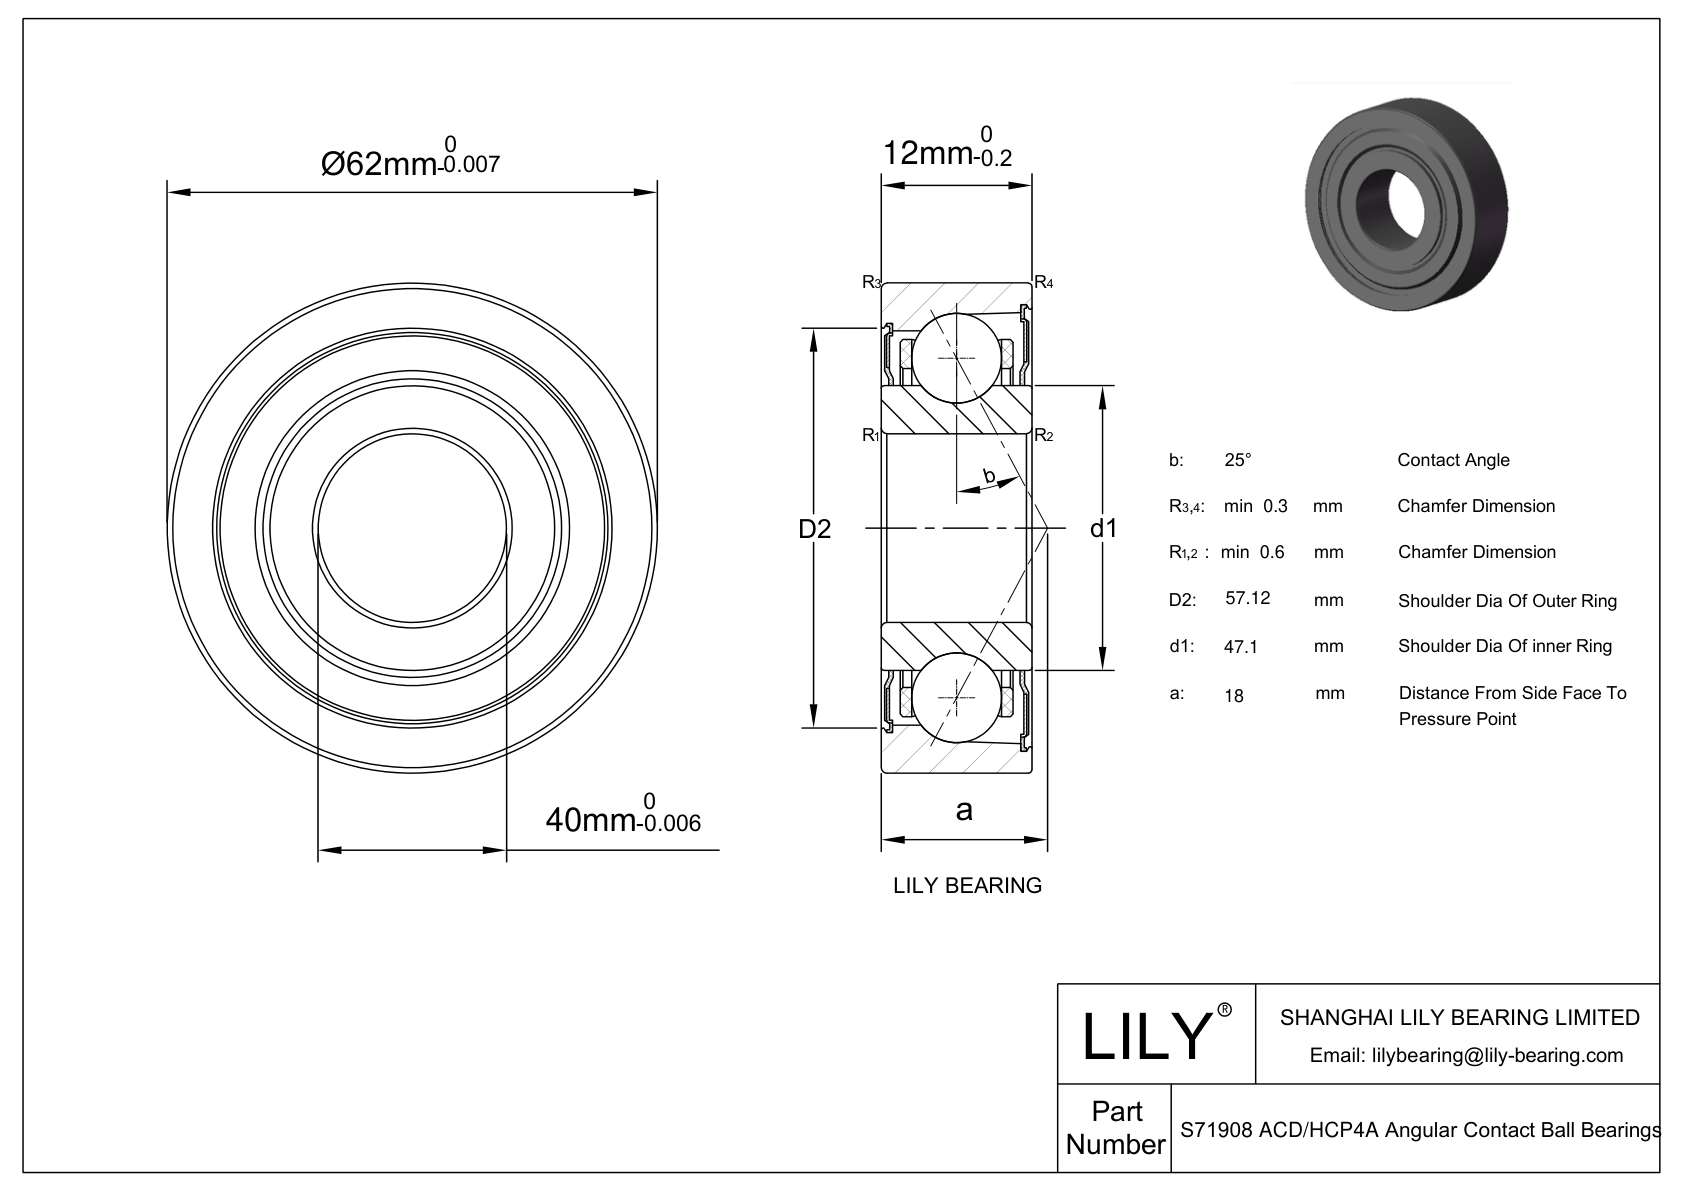 S71908 ACD/HCP4A Super Precision Angular Contact Ball Bearings cad drawing